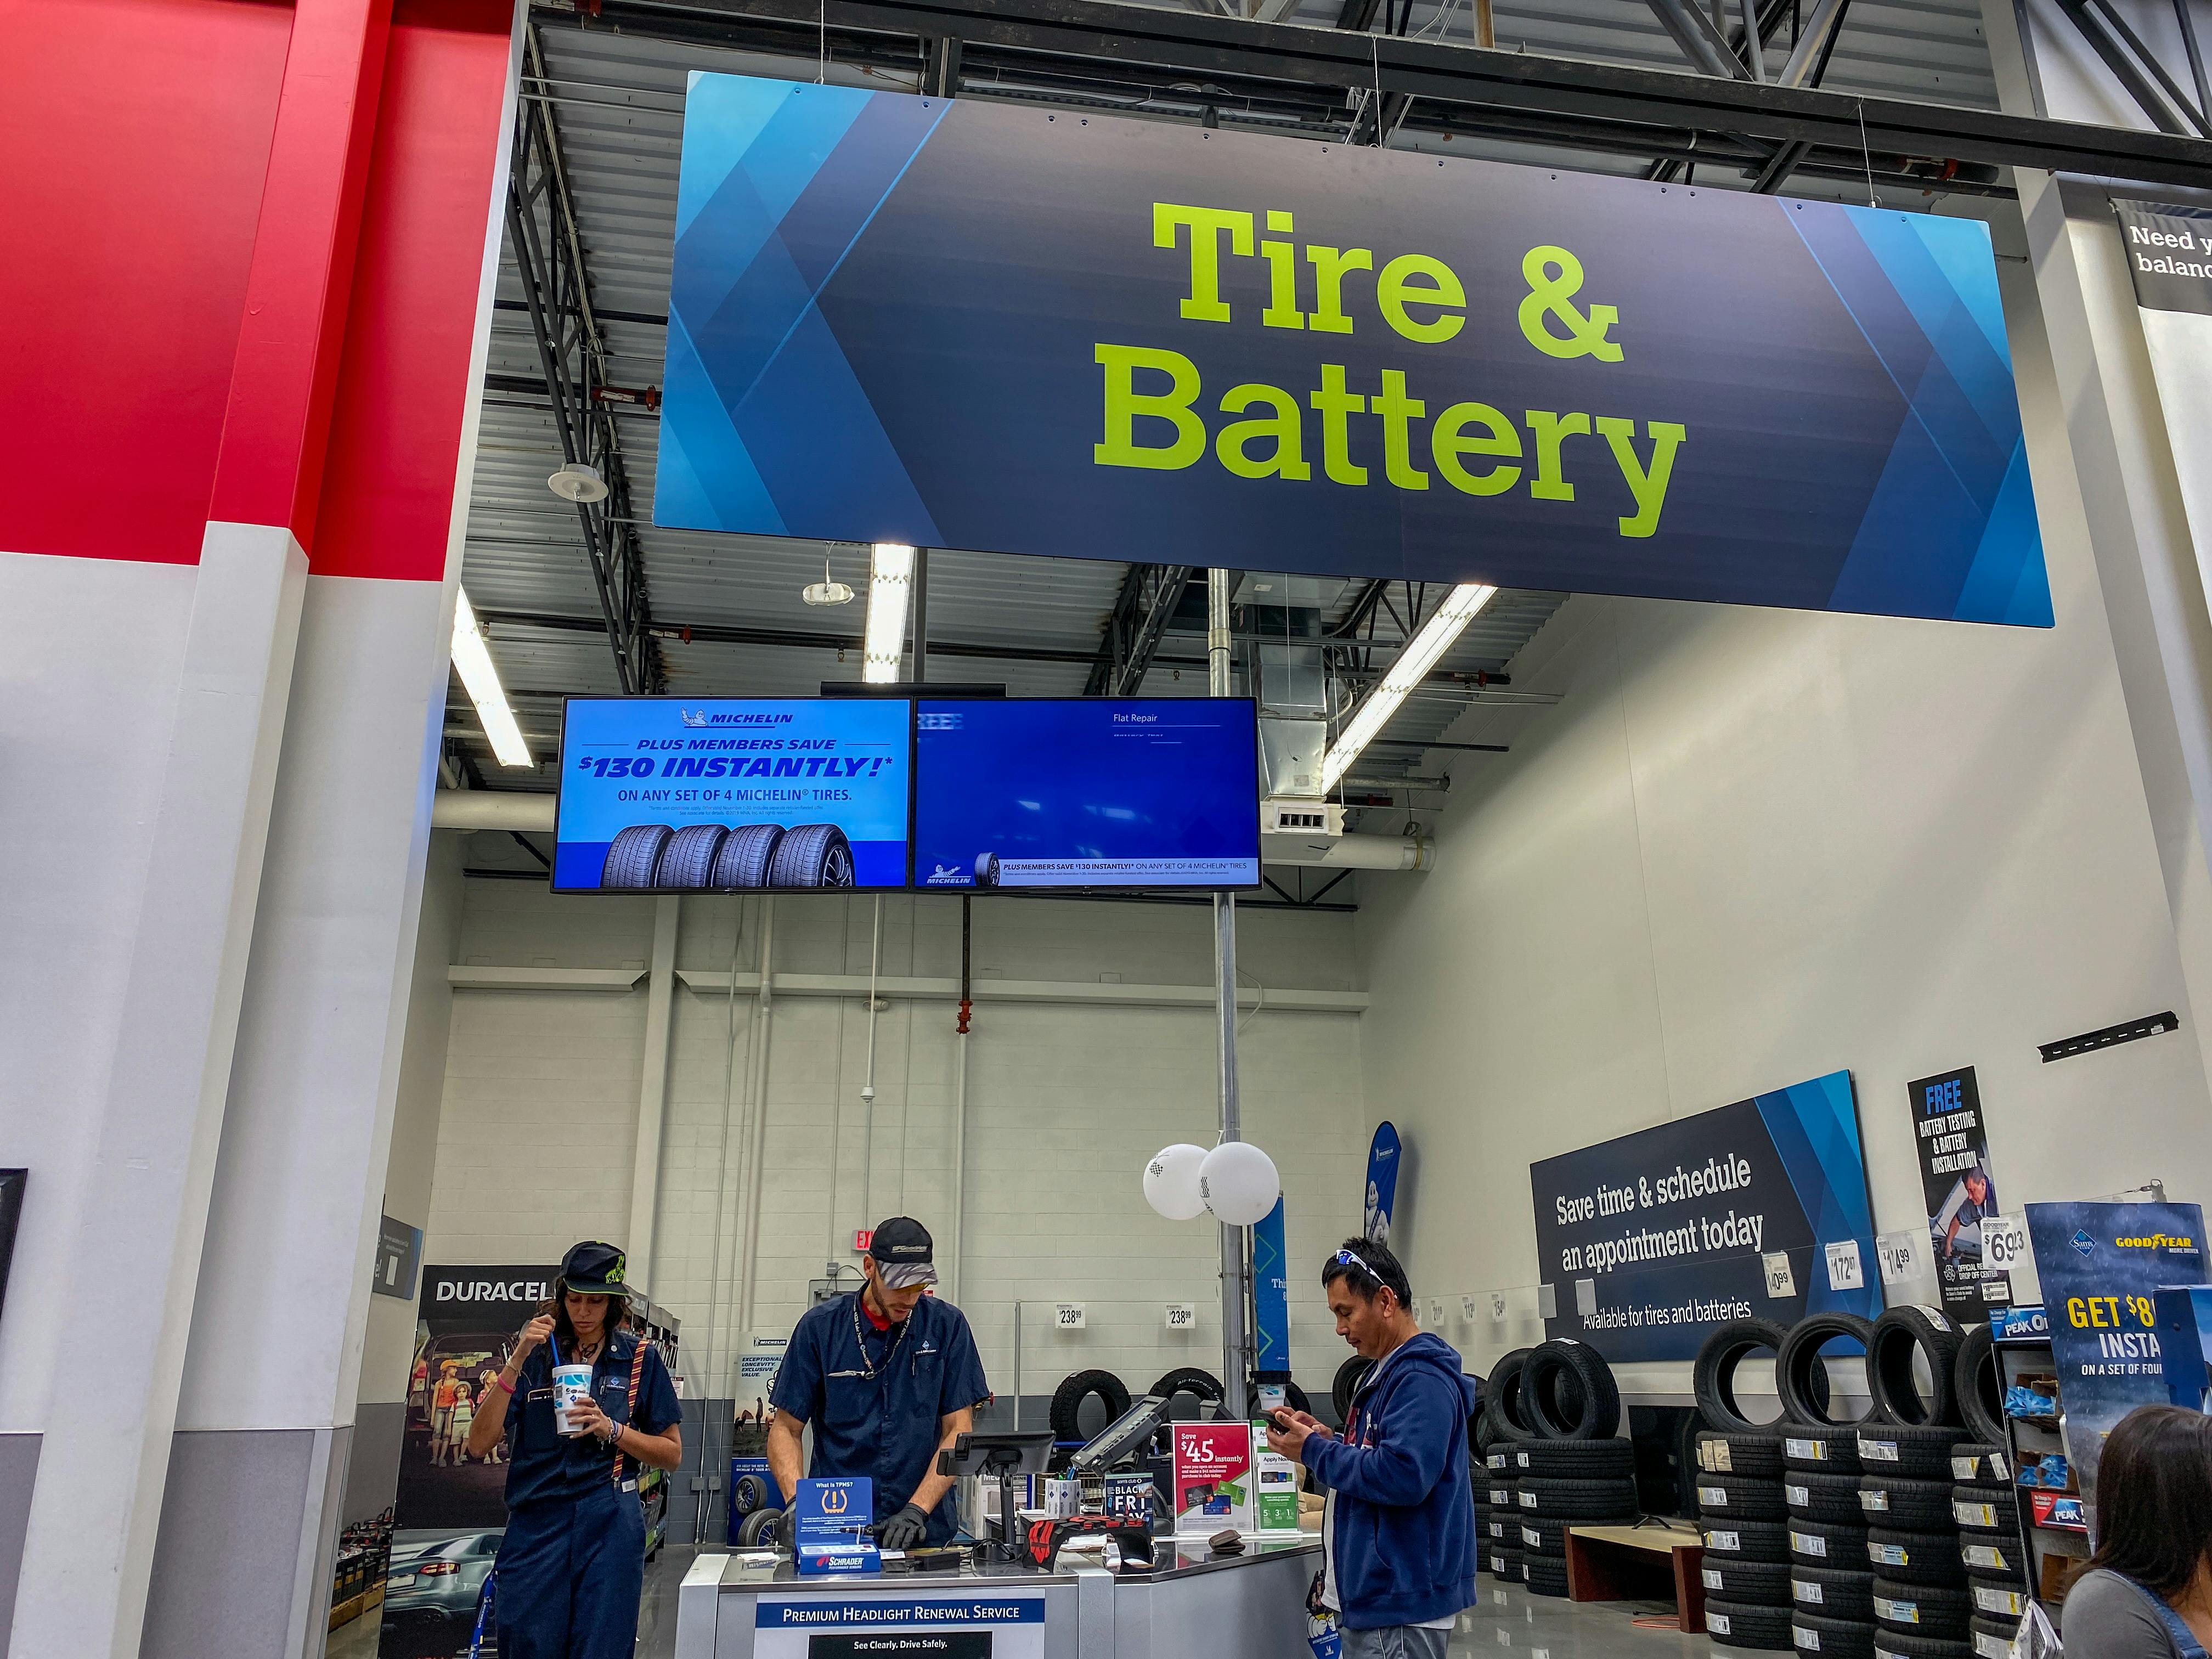 Is Sam’s Club Gas Any Good & Is It Top Tier? (Your Full Guide)